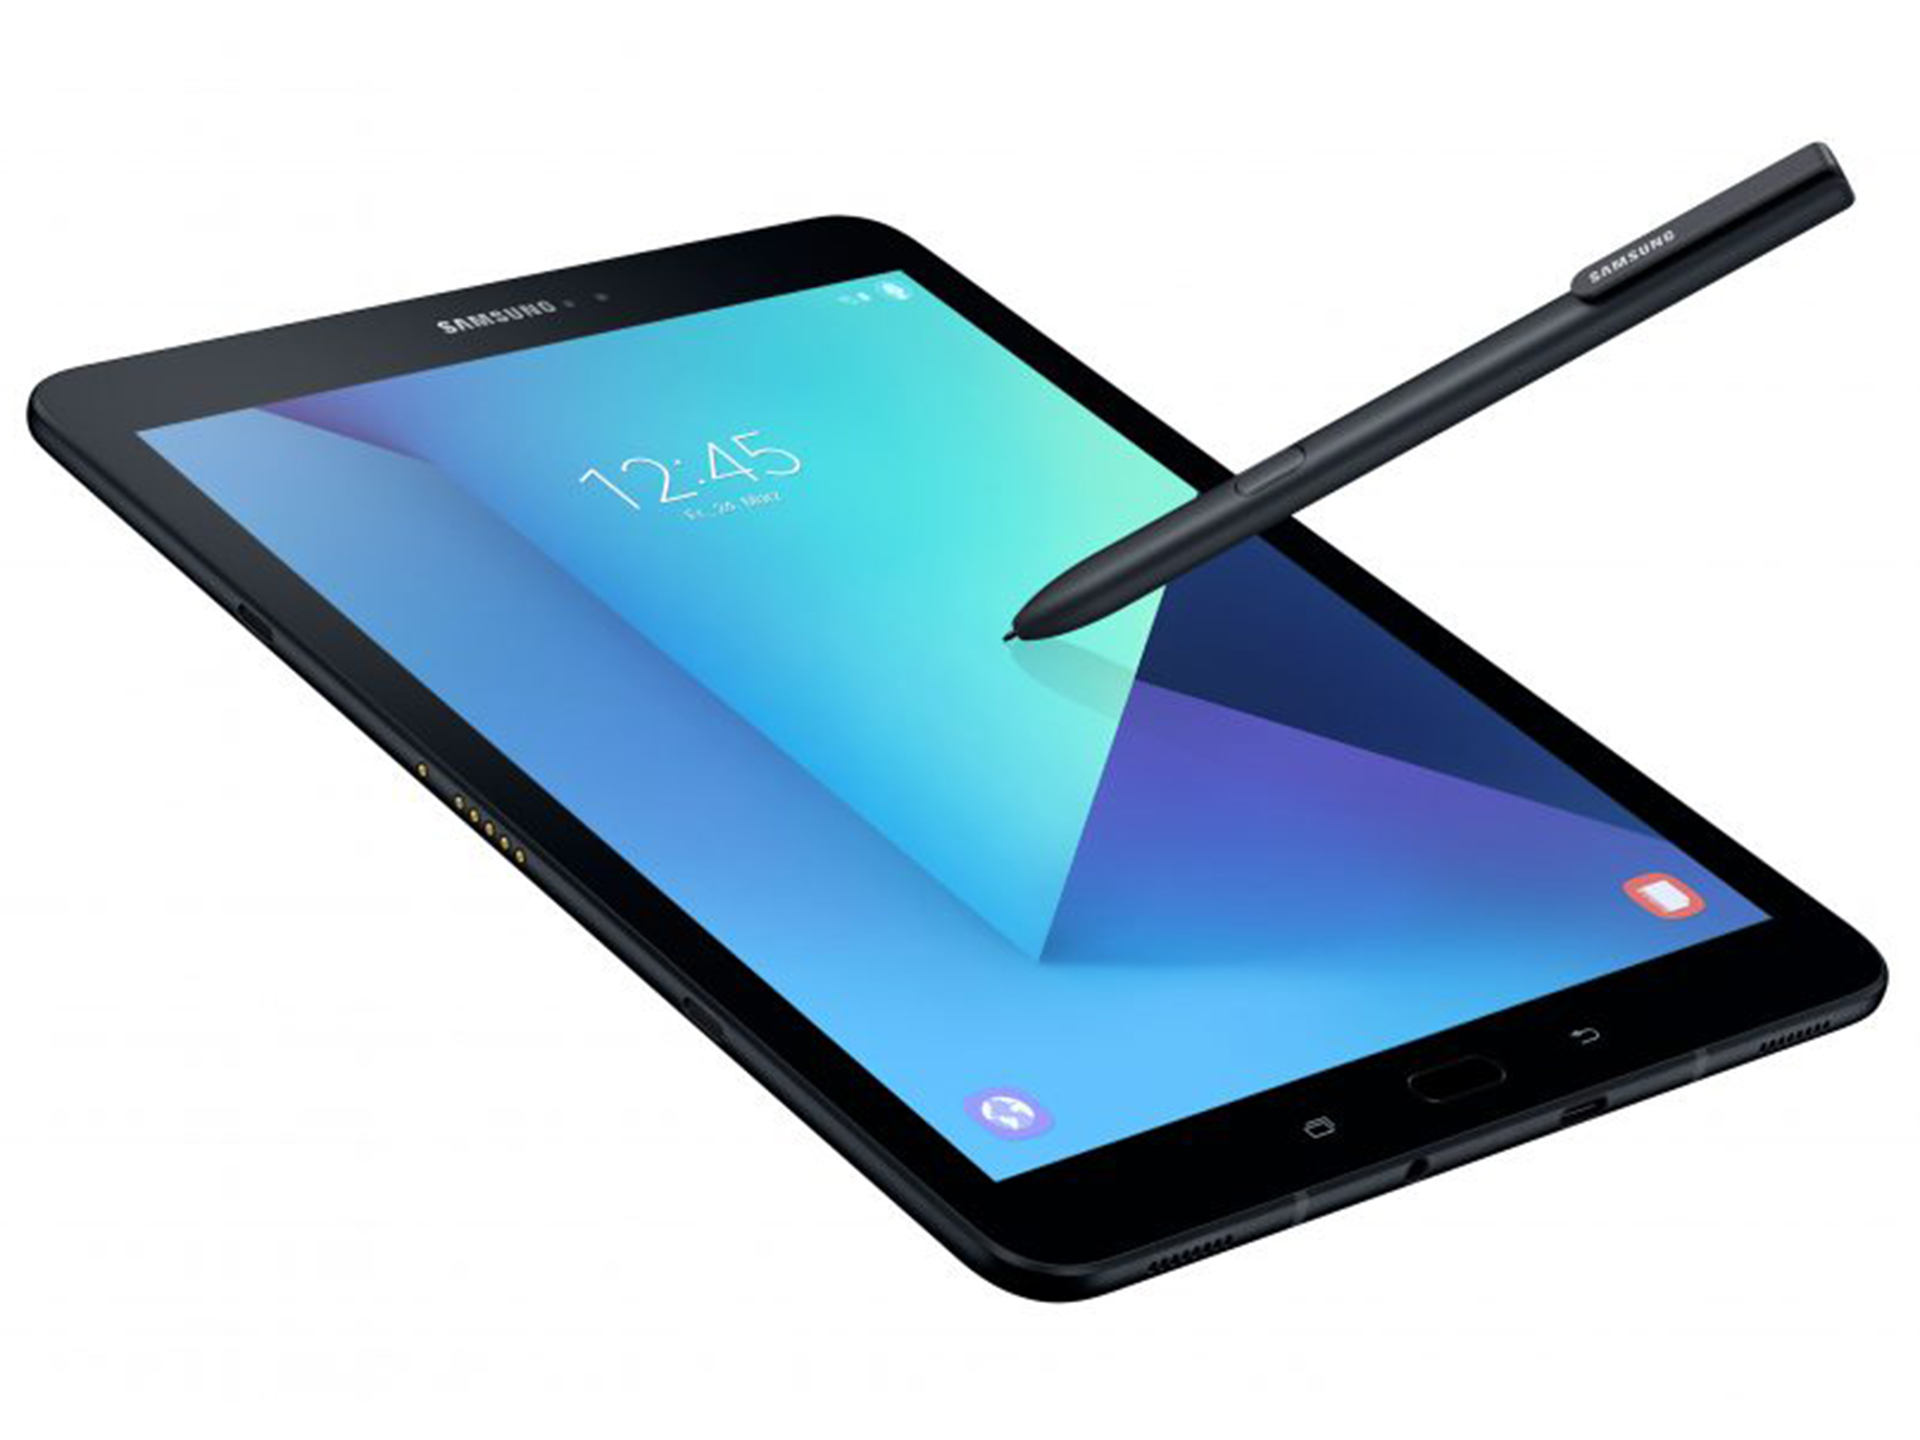 Galaxy Tab S3 Tablet Review - NotebookCheck.net Reviews